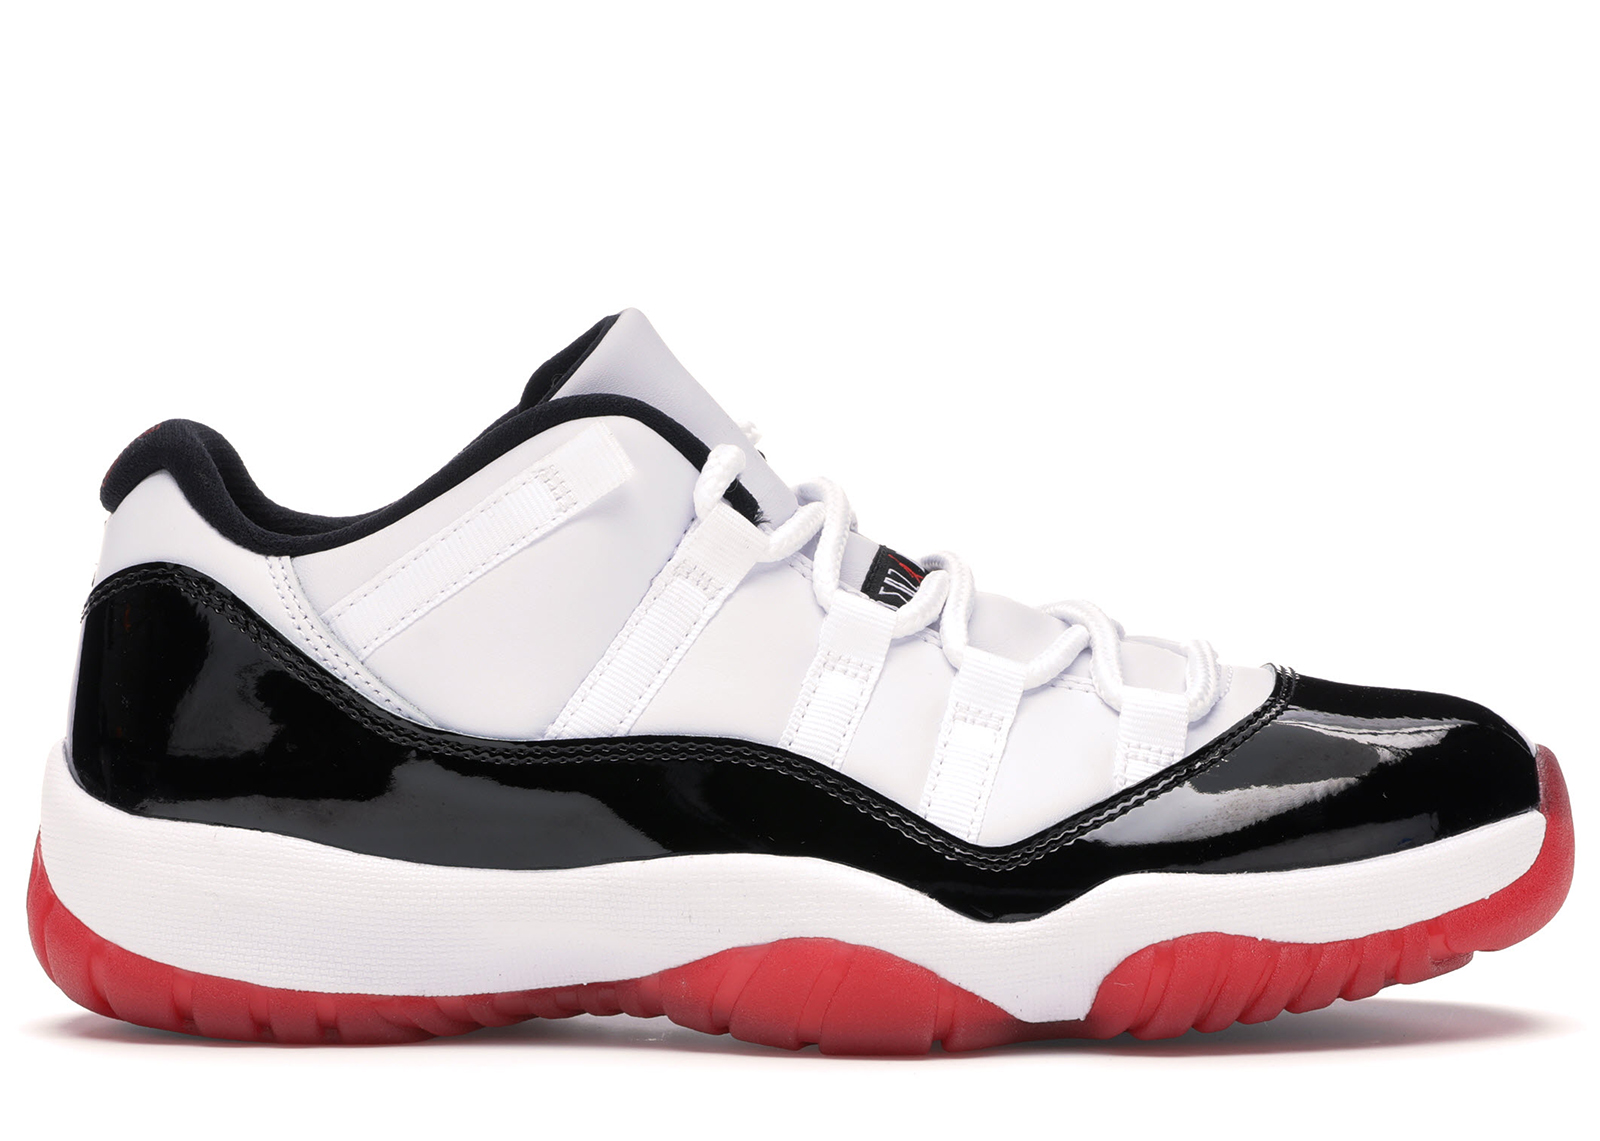 red black and white low top jordans